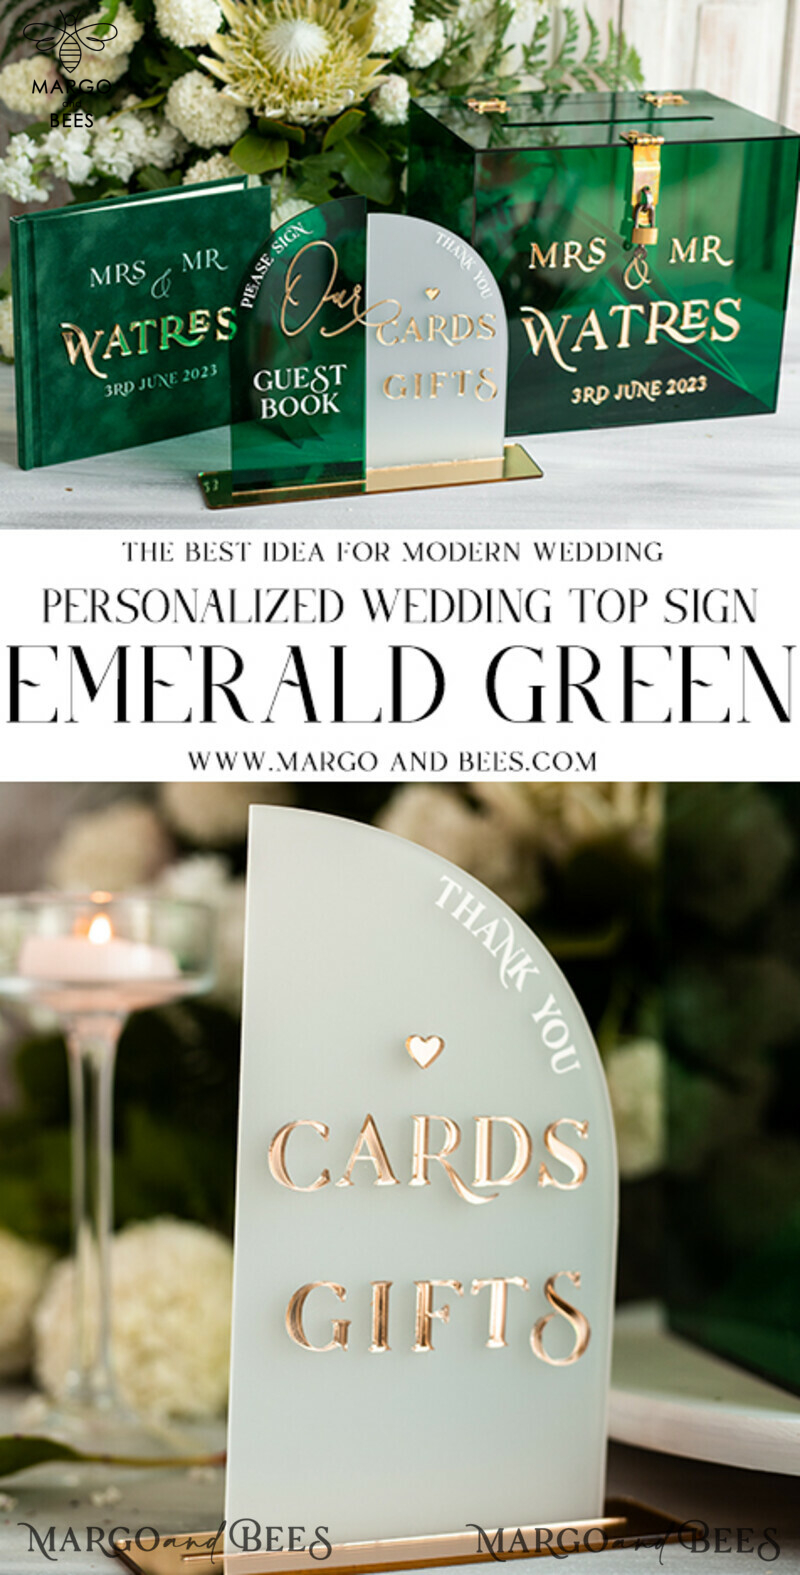 What to do with wedding card box after wedding?-34